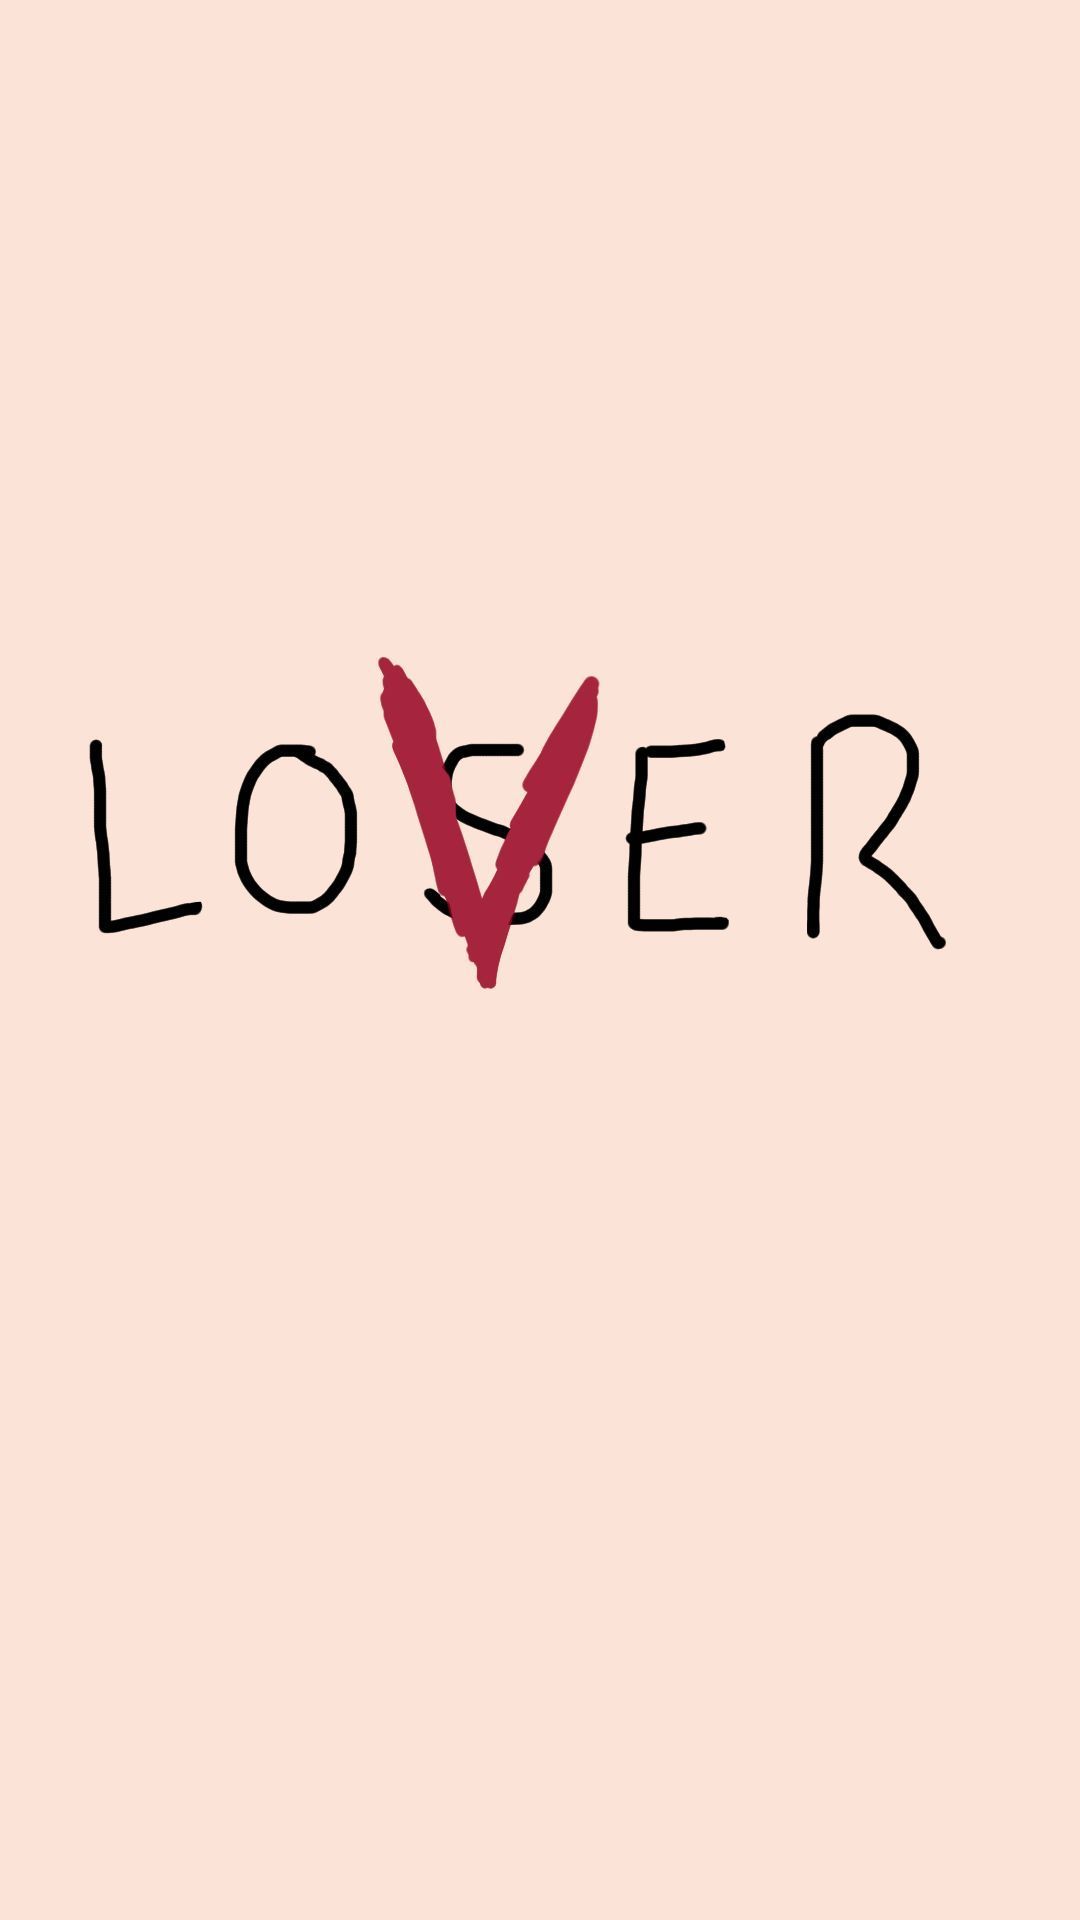 Lover Loser Wallpapers Wallpaper Cave | peacecommission.kdsg.gov.ng